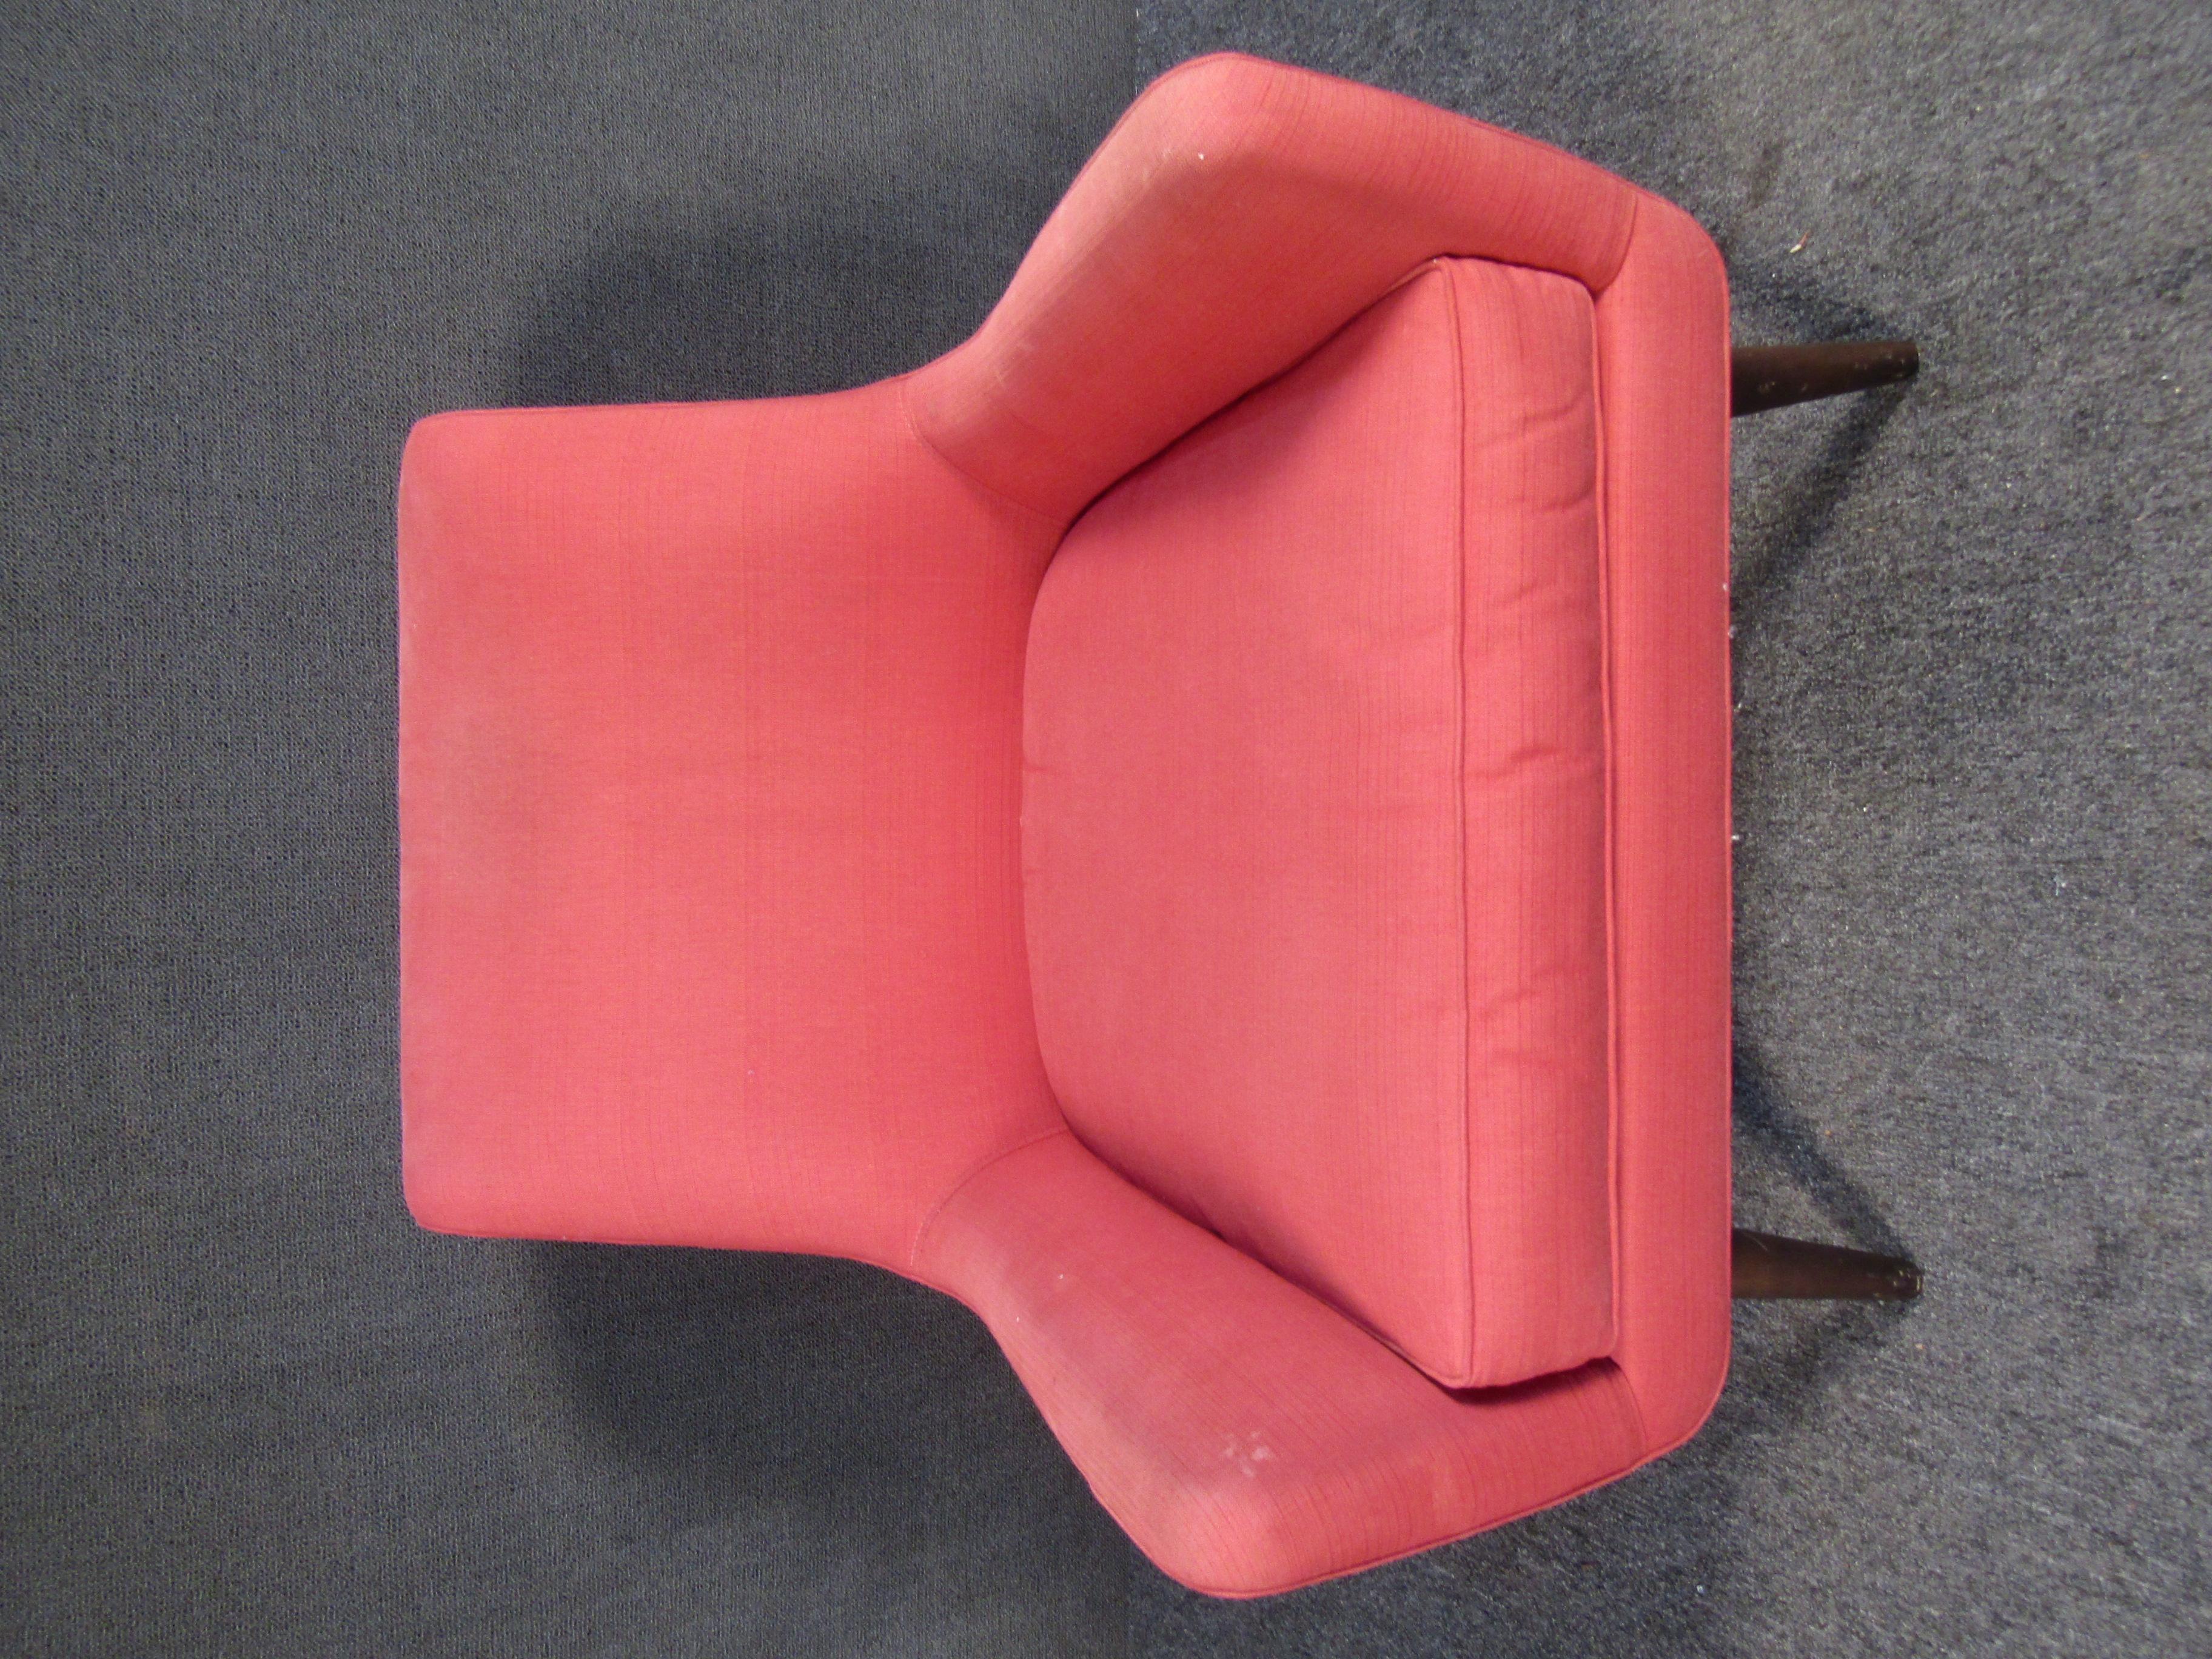 With a comfortable and stylish Mid-Century Modern design, this vintage lounge chair adds a pop of color to any interior. Please confirm item location with seller (NY/NJ).